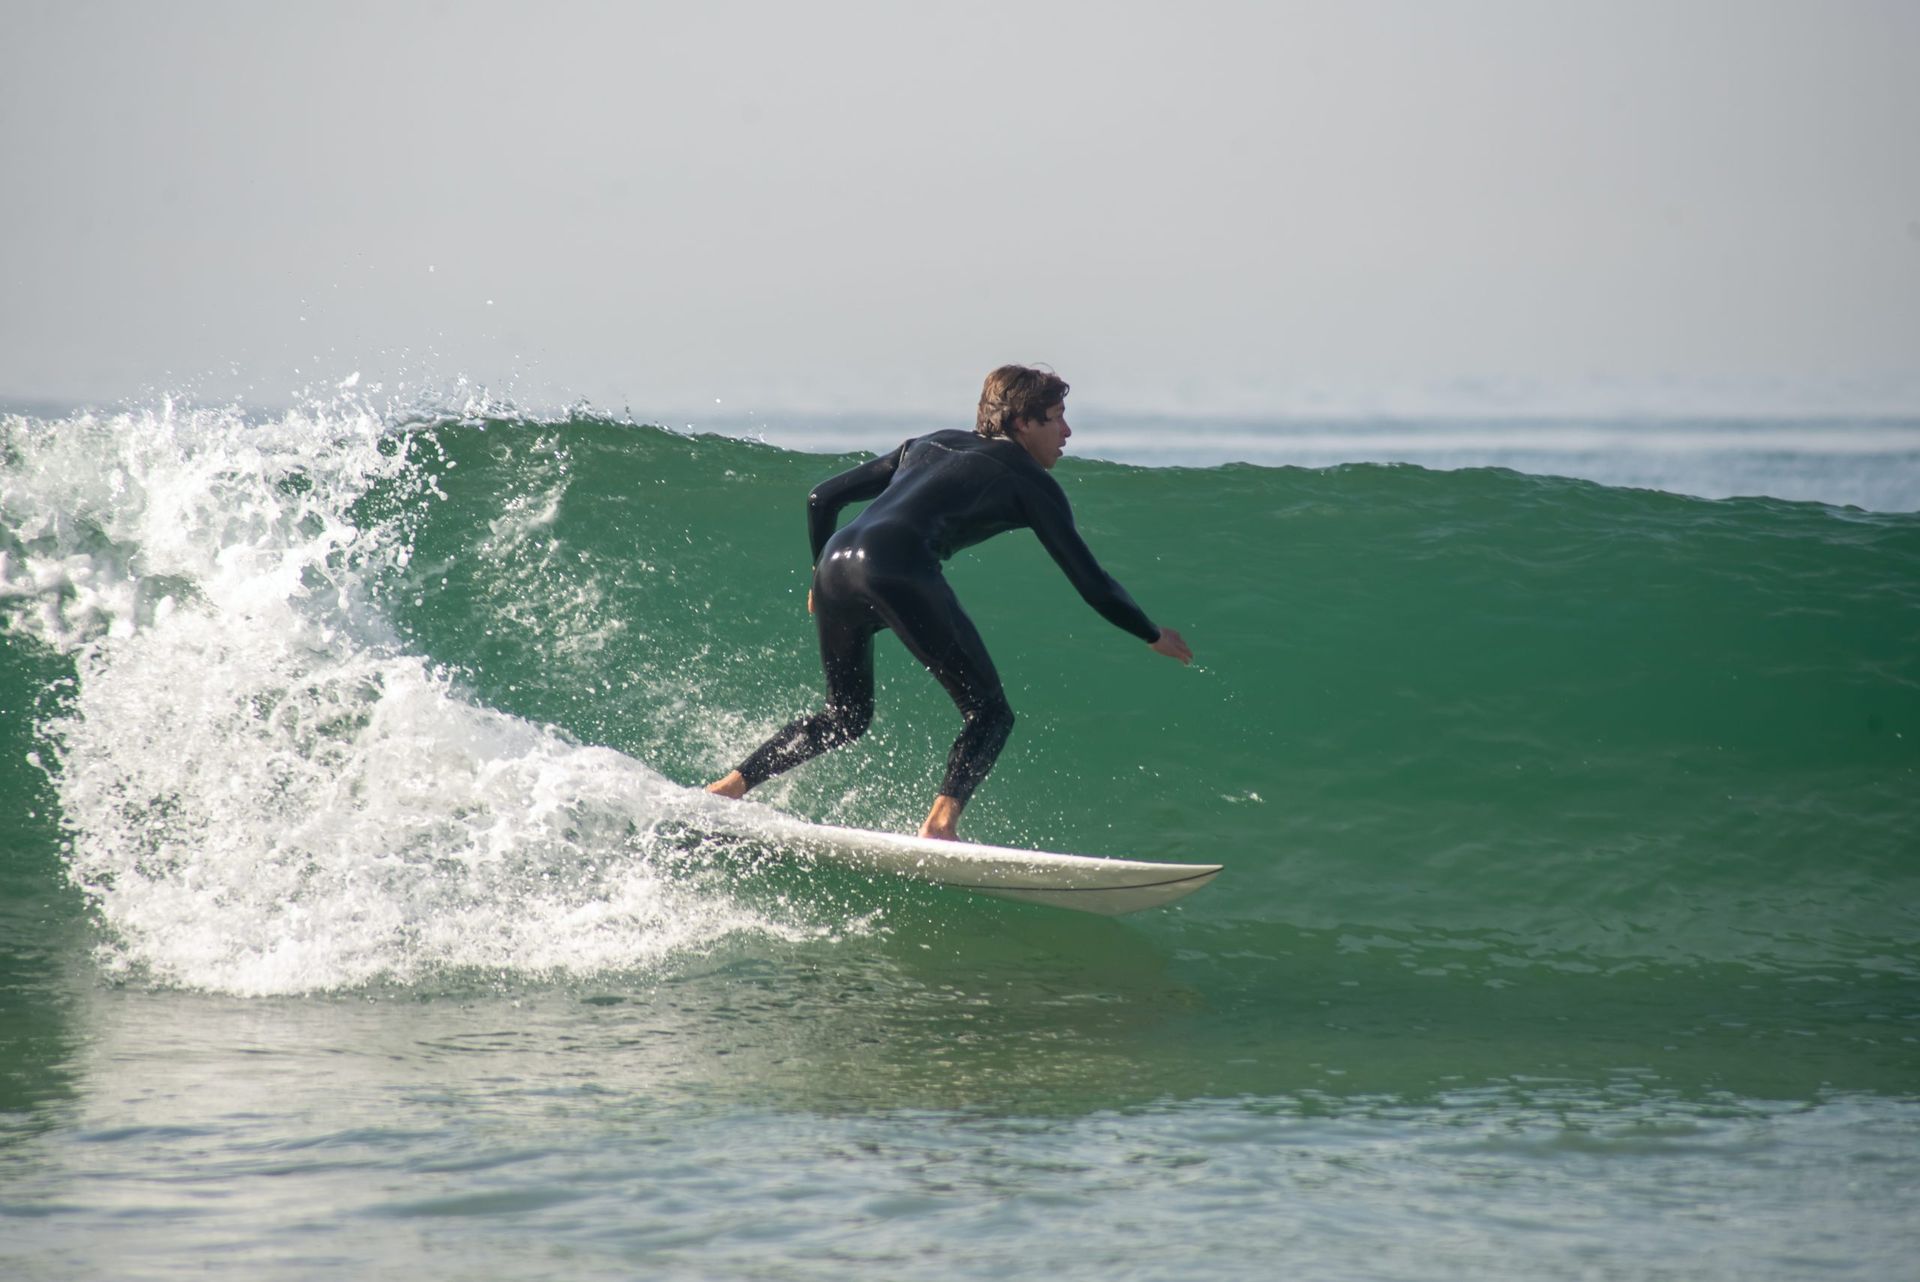 Tips for Choosing Your First Wetsuit